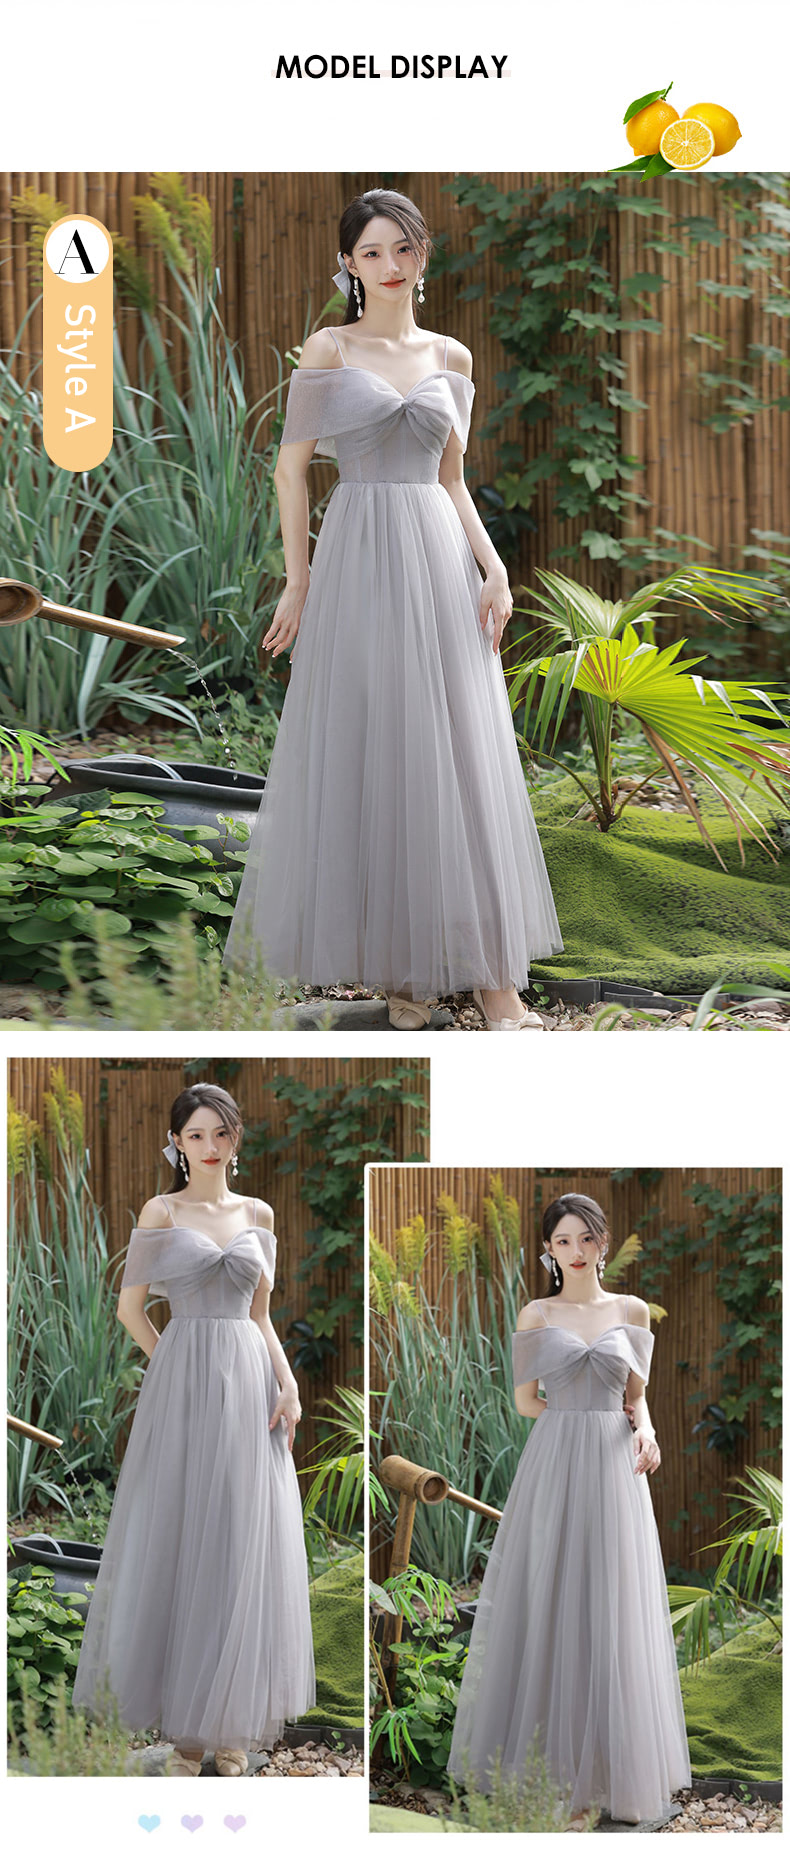 Womens-Casual-Party-Wedding-Guest-Bridesmaid-Maxi-Dress-Gown15.jpg